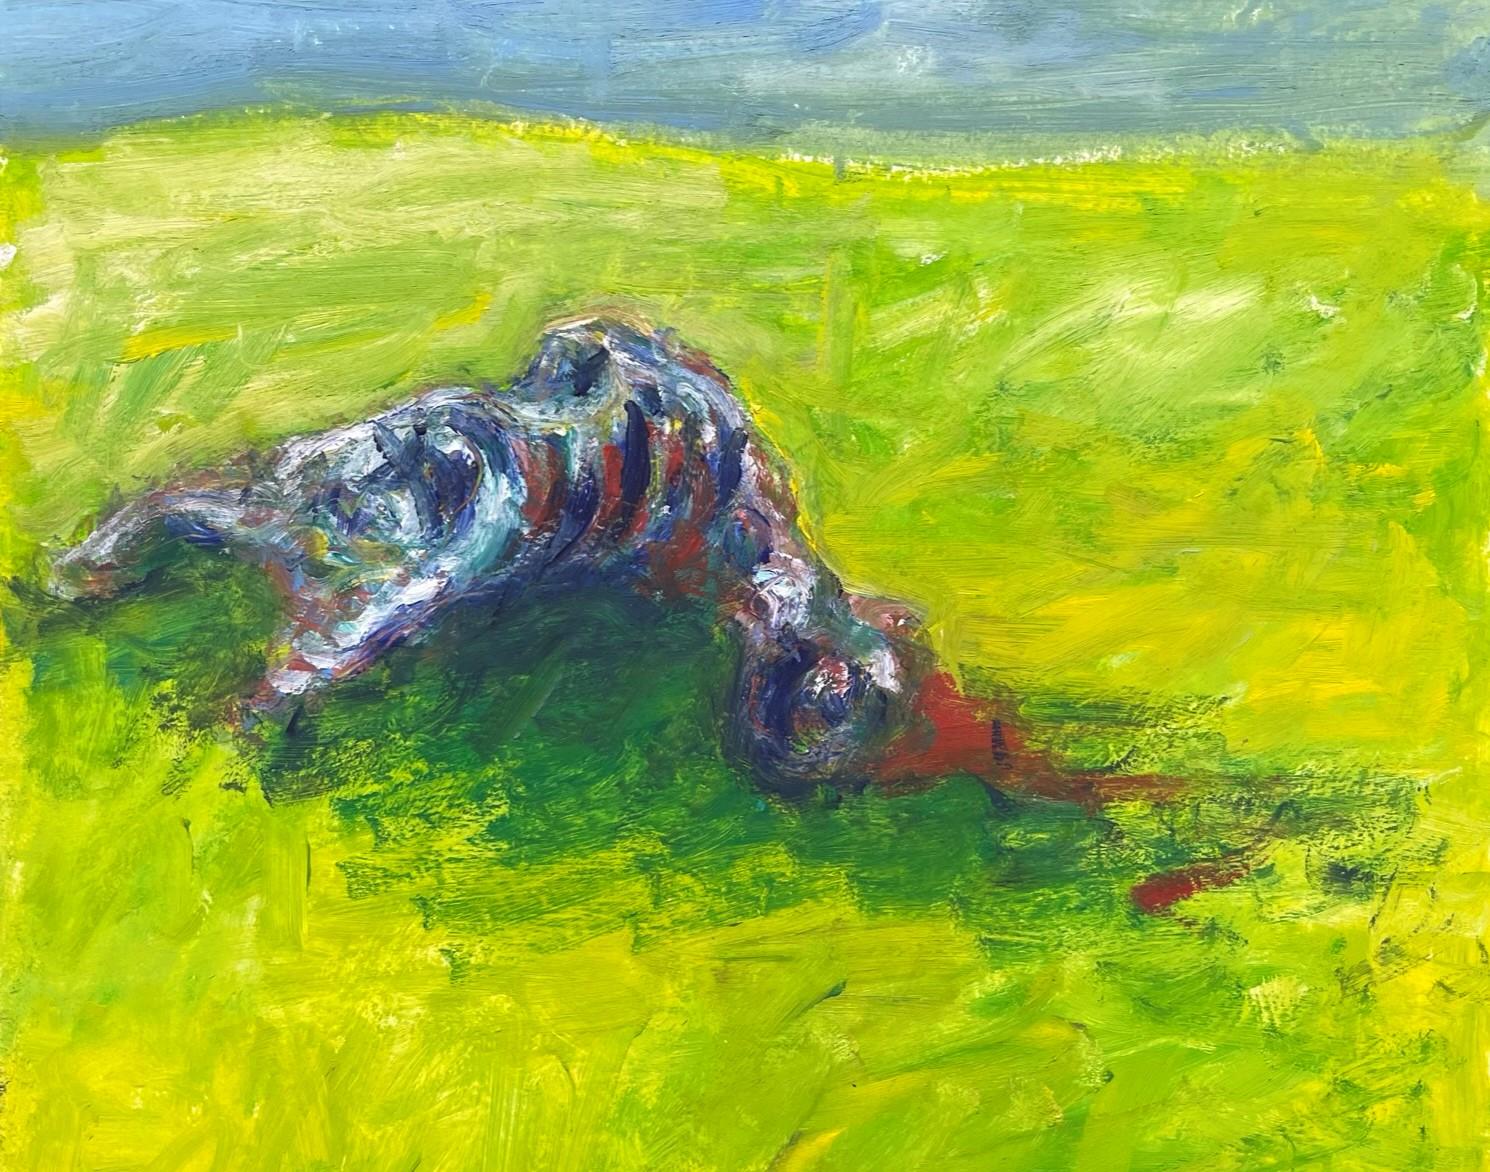 Remains (Body in the Field 9), 2022
oil on paper (signed on reverse)
16 17/32 H x 11 13/16 W in.
42 H x 30 W cm

Zsolt Berszán embodies in his works the dissolution of the human body through the prism of the fragment, the body in pieces, and the